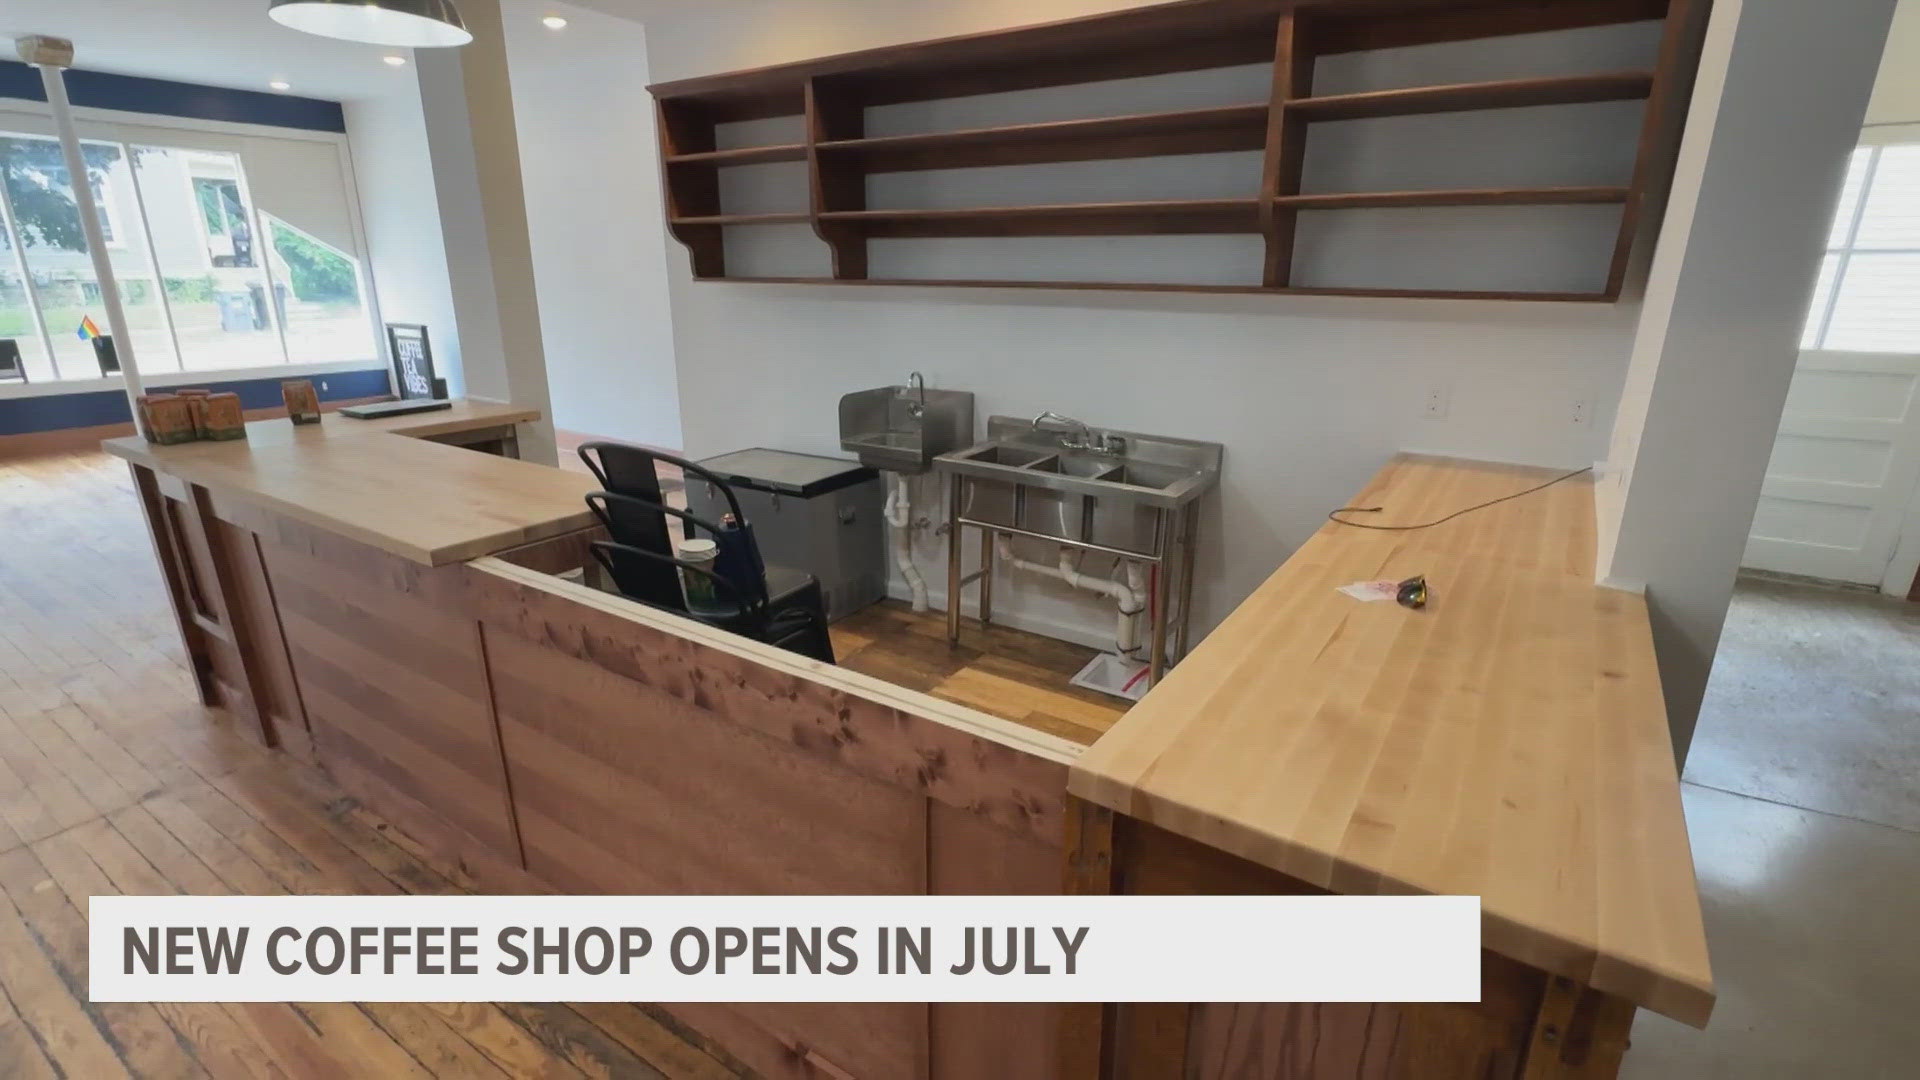 Lotus Brew Coffee started as a booth at the Fulton Street Farmers Market and will be having a soft opening from July 4-7.